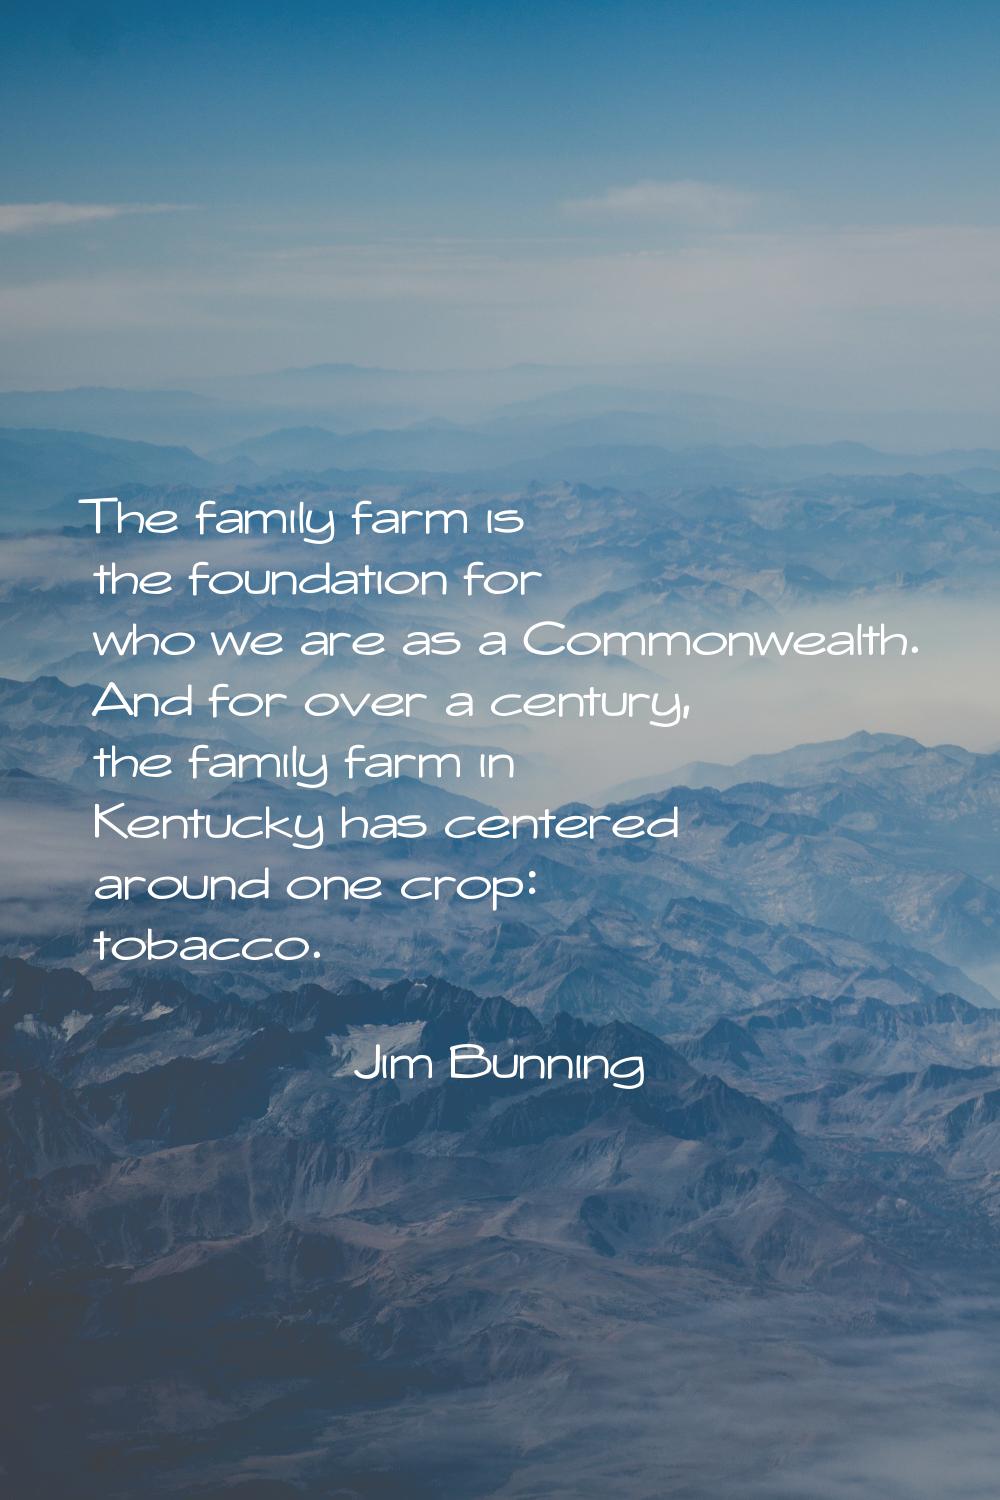 The family farm is the foundation for who we are as a Commonwealth. And for over a century, the fam